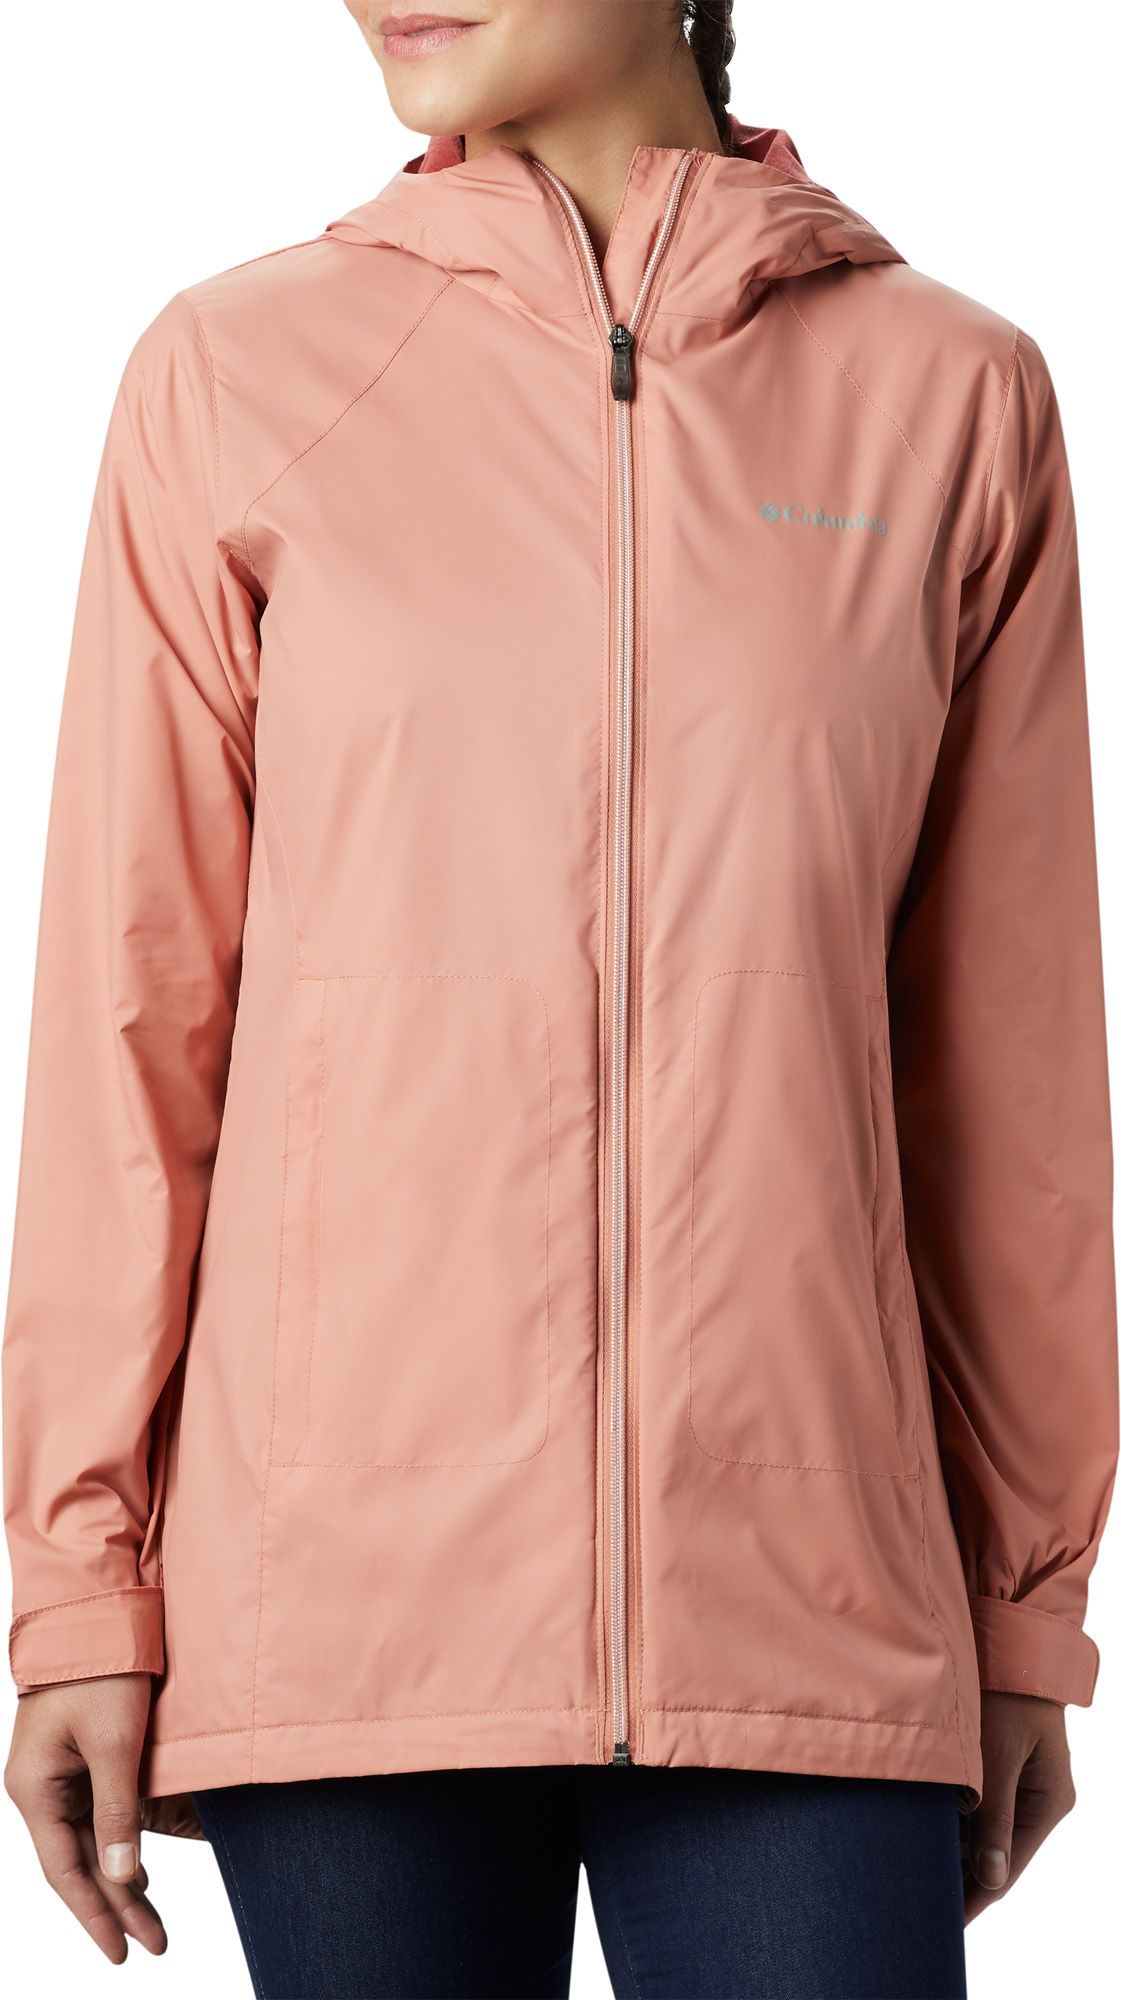 clearance columbia women's jackets